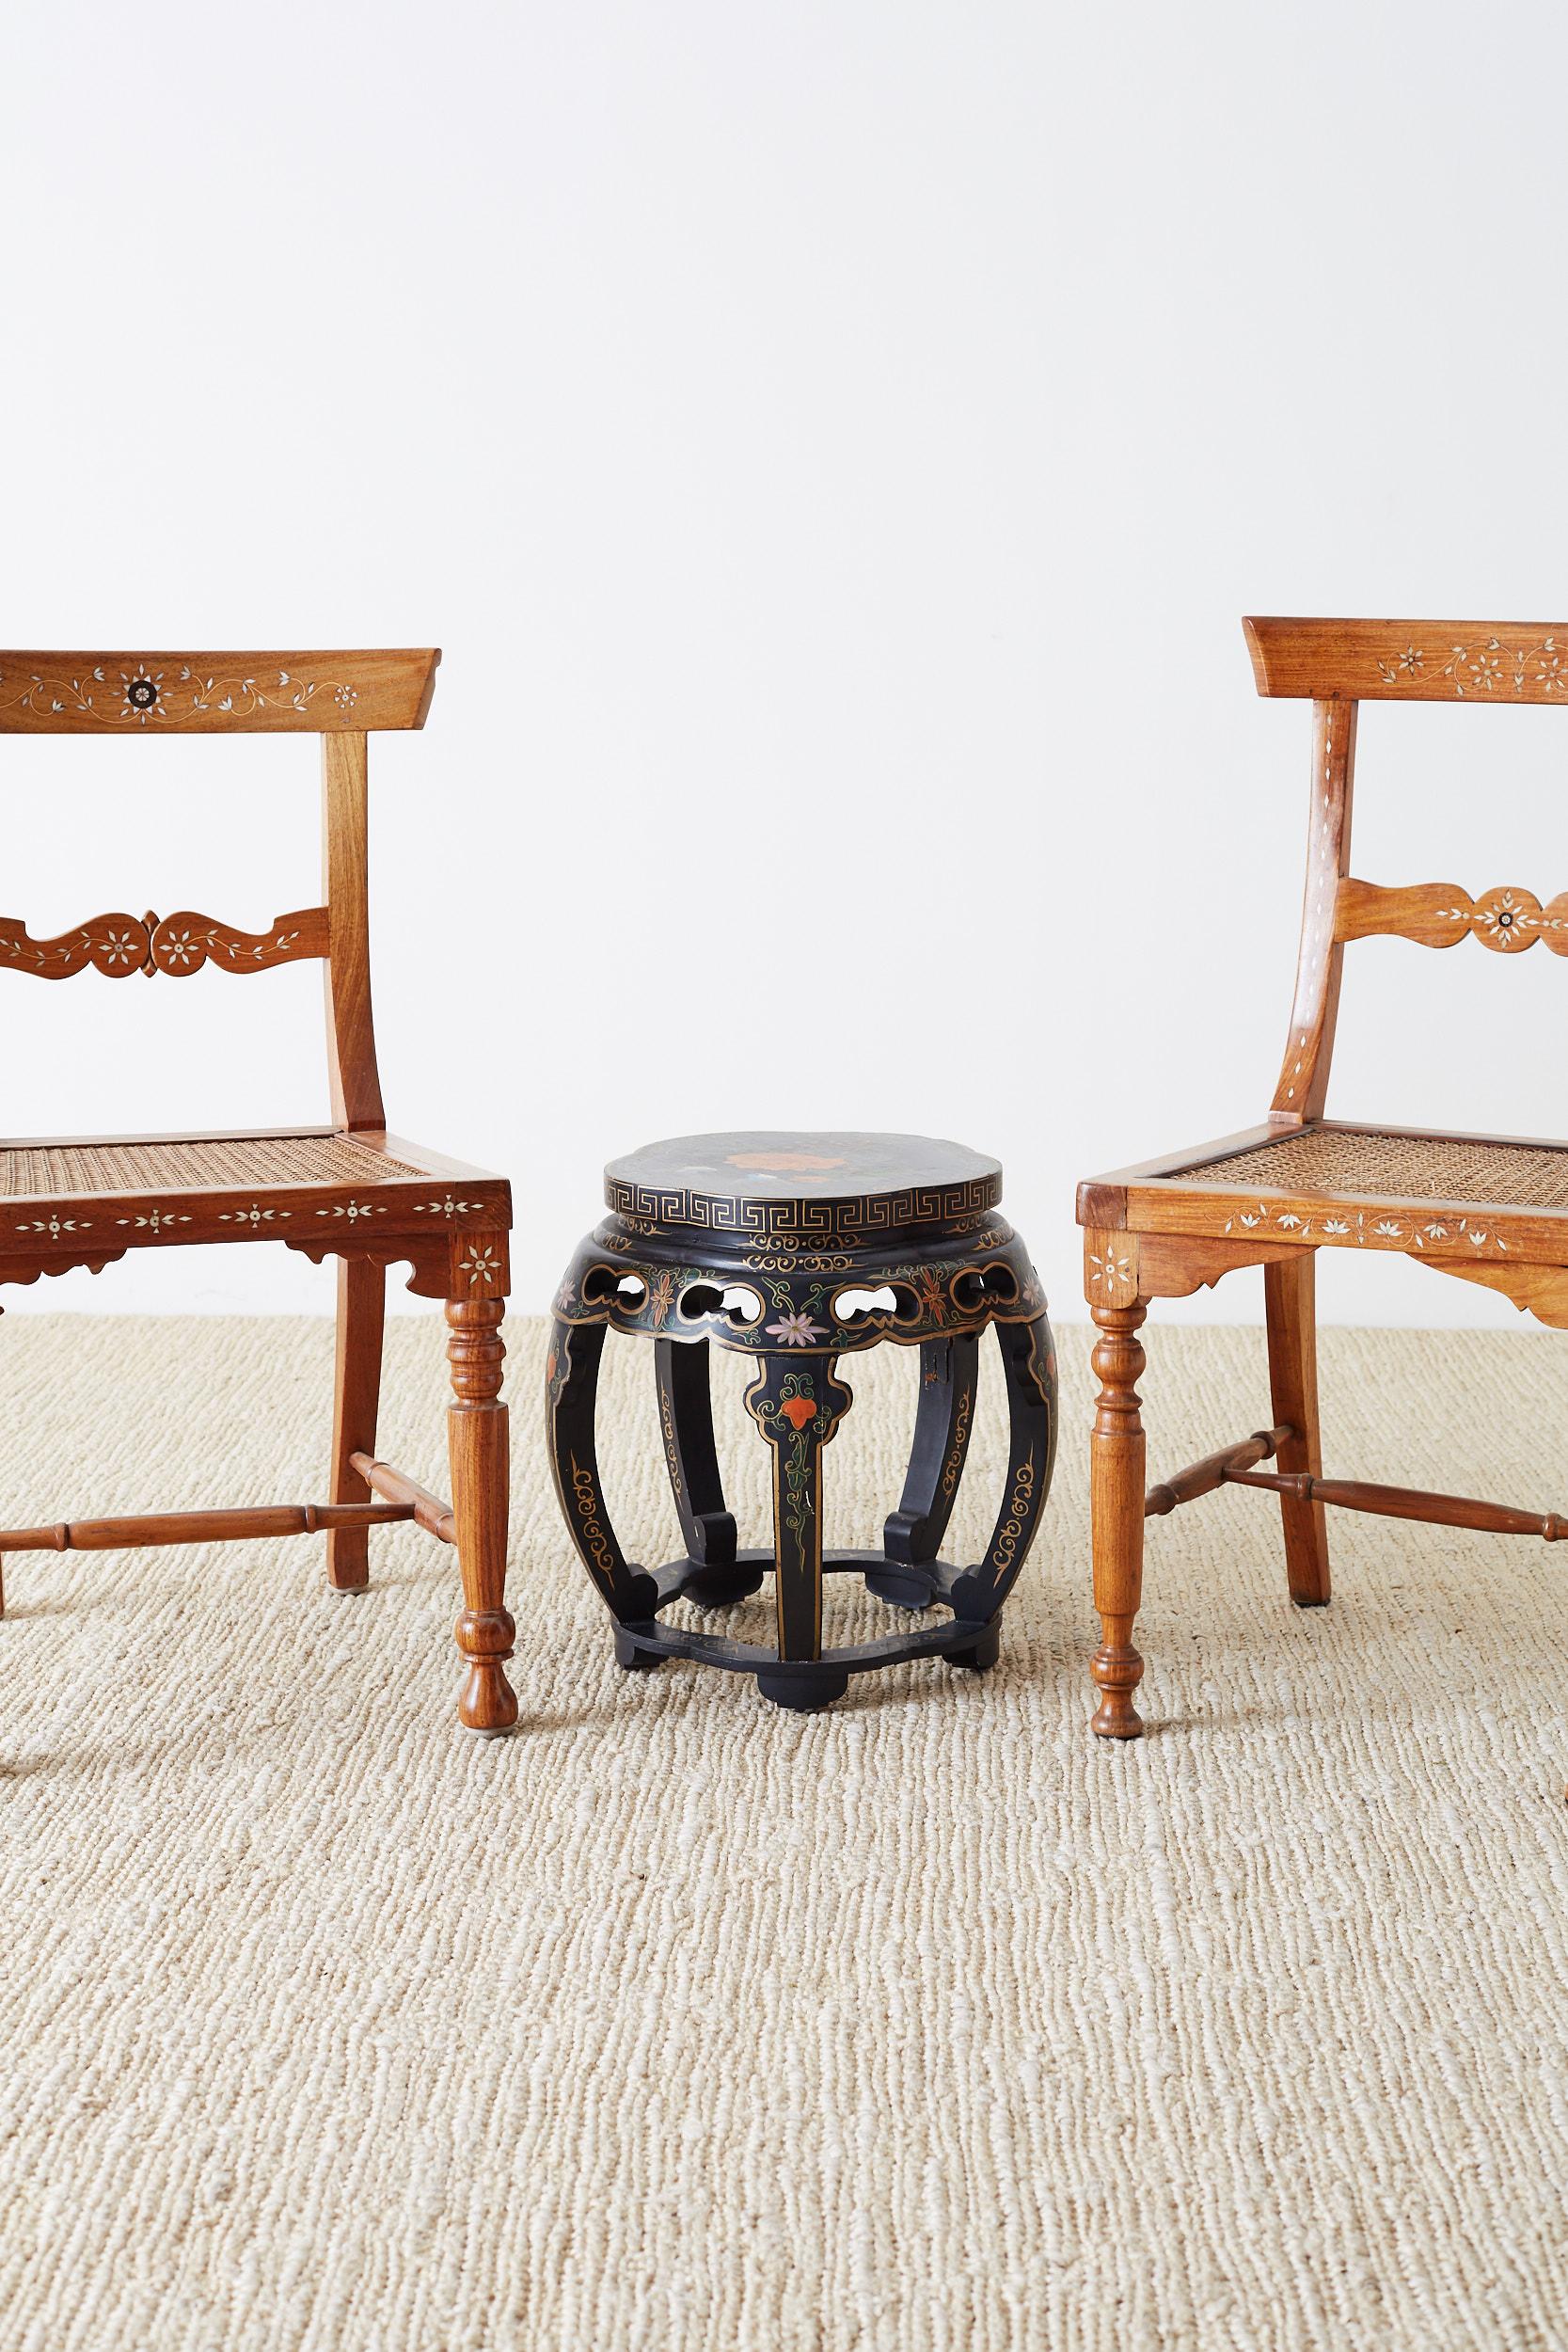 Assembled pair of similar Anglo-Indian side chairs made of koa wood. Featuring a floral motif decorative bone inlay and a caned seat. Beautiful grain patterns on the radiant wood of both chairs. Supported by turned legs in the front, one chair is